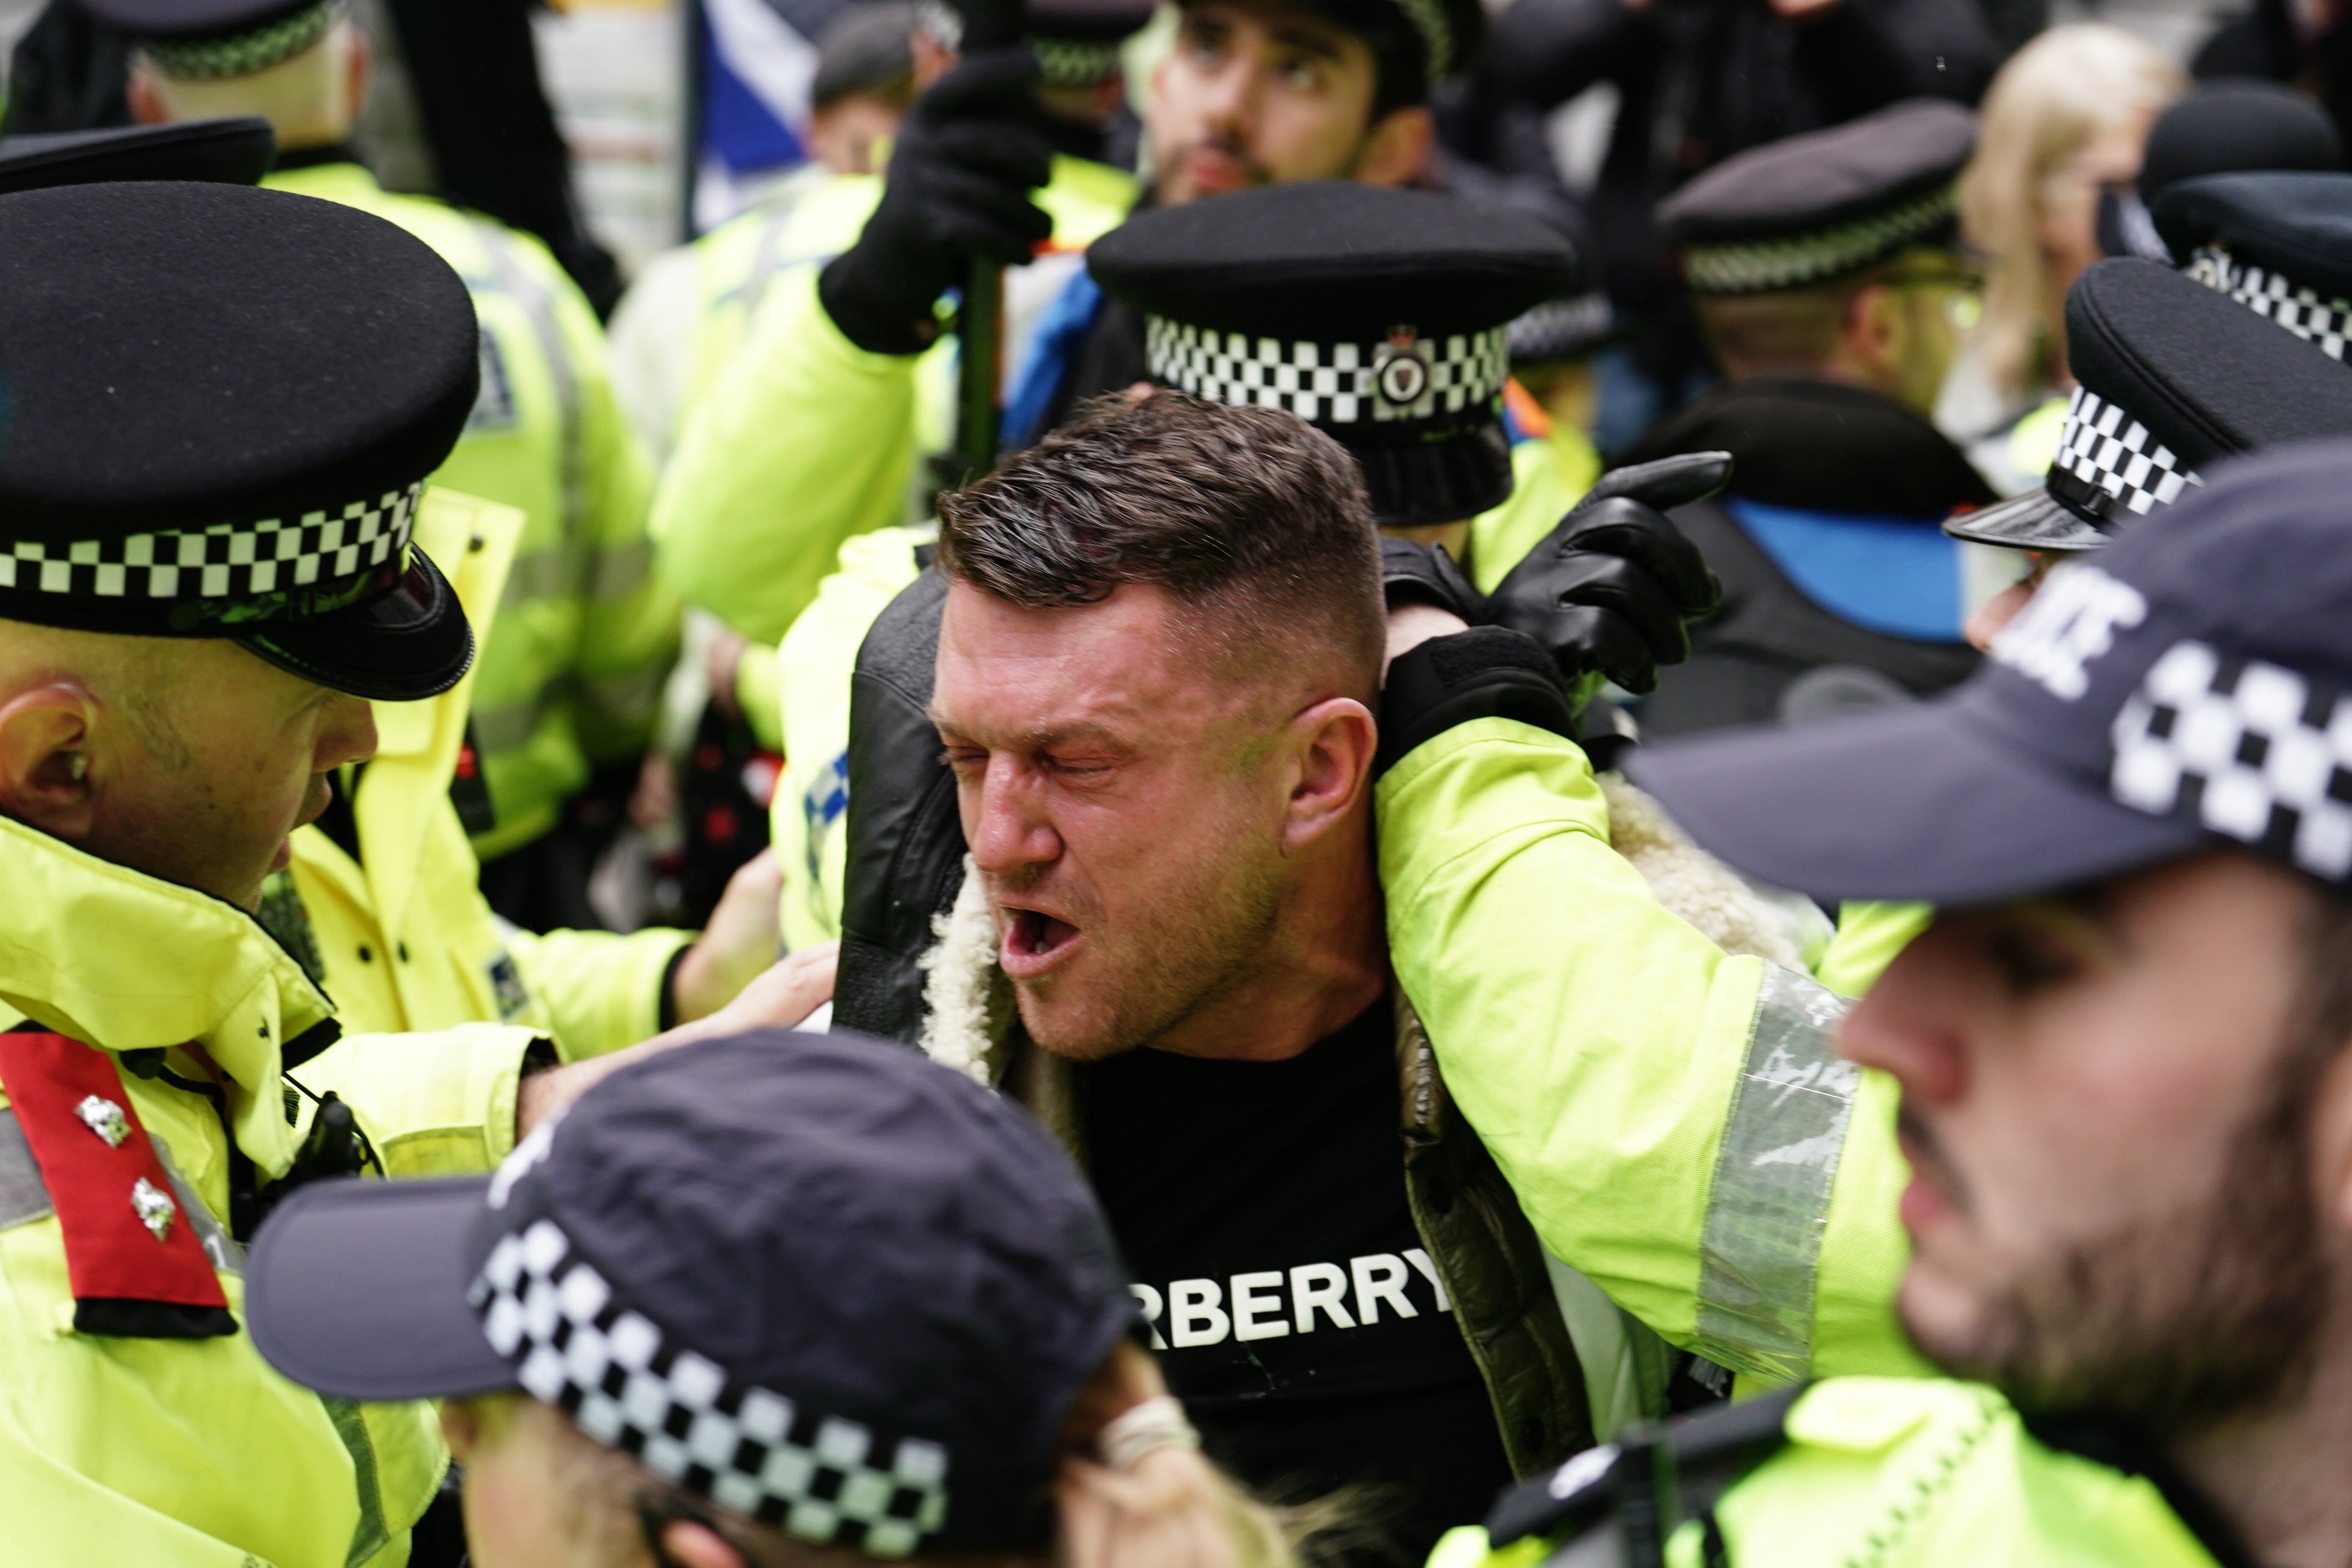 EDL founder Tommy Robinson was prevented from attending the march by several officers